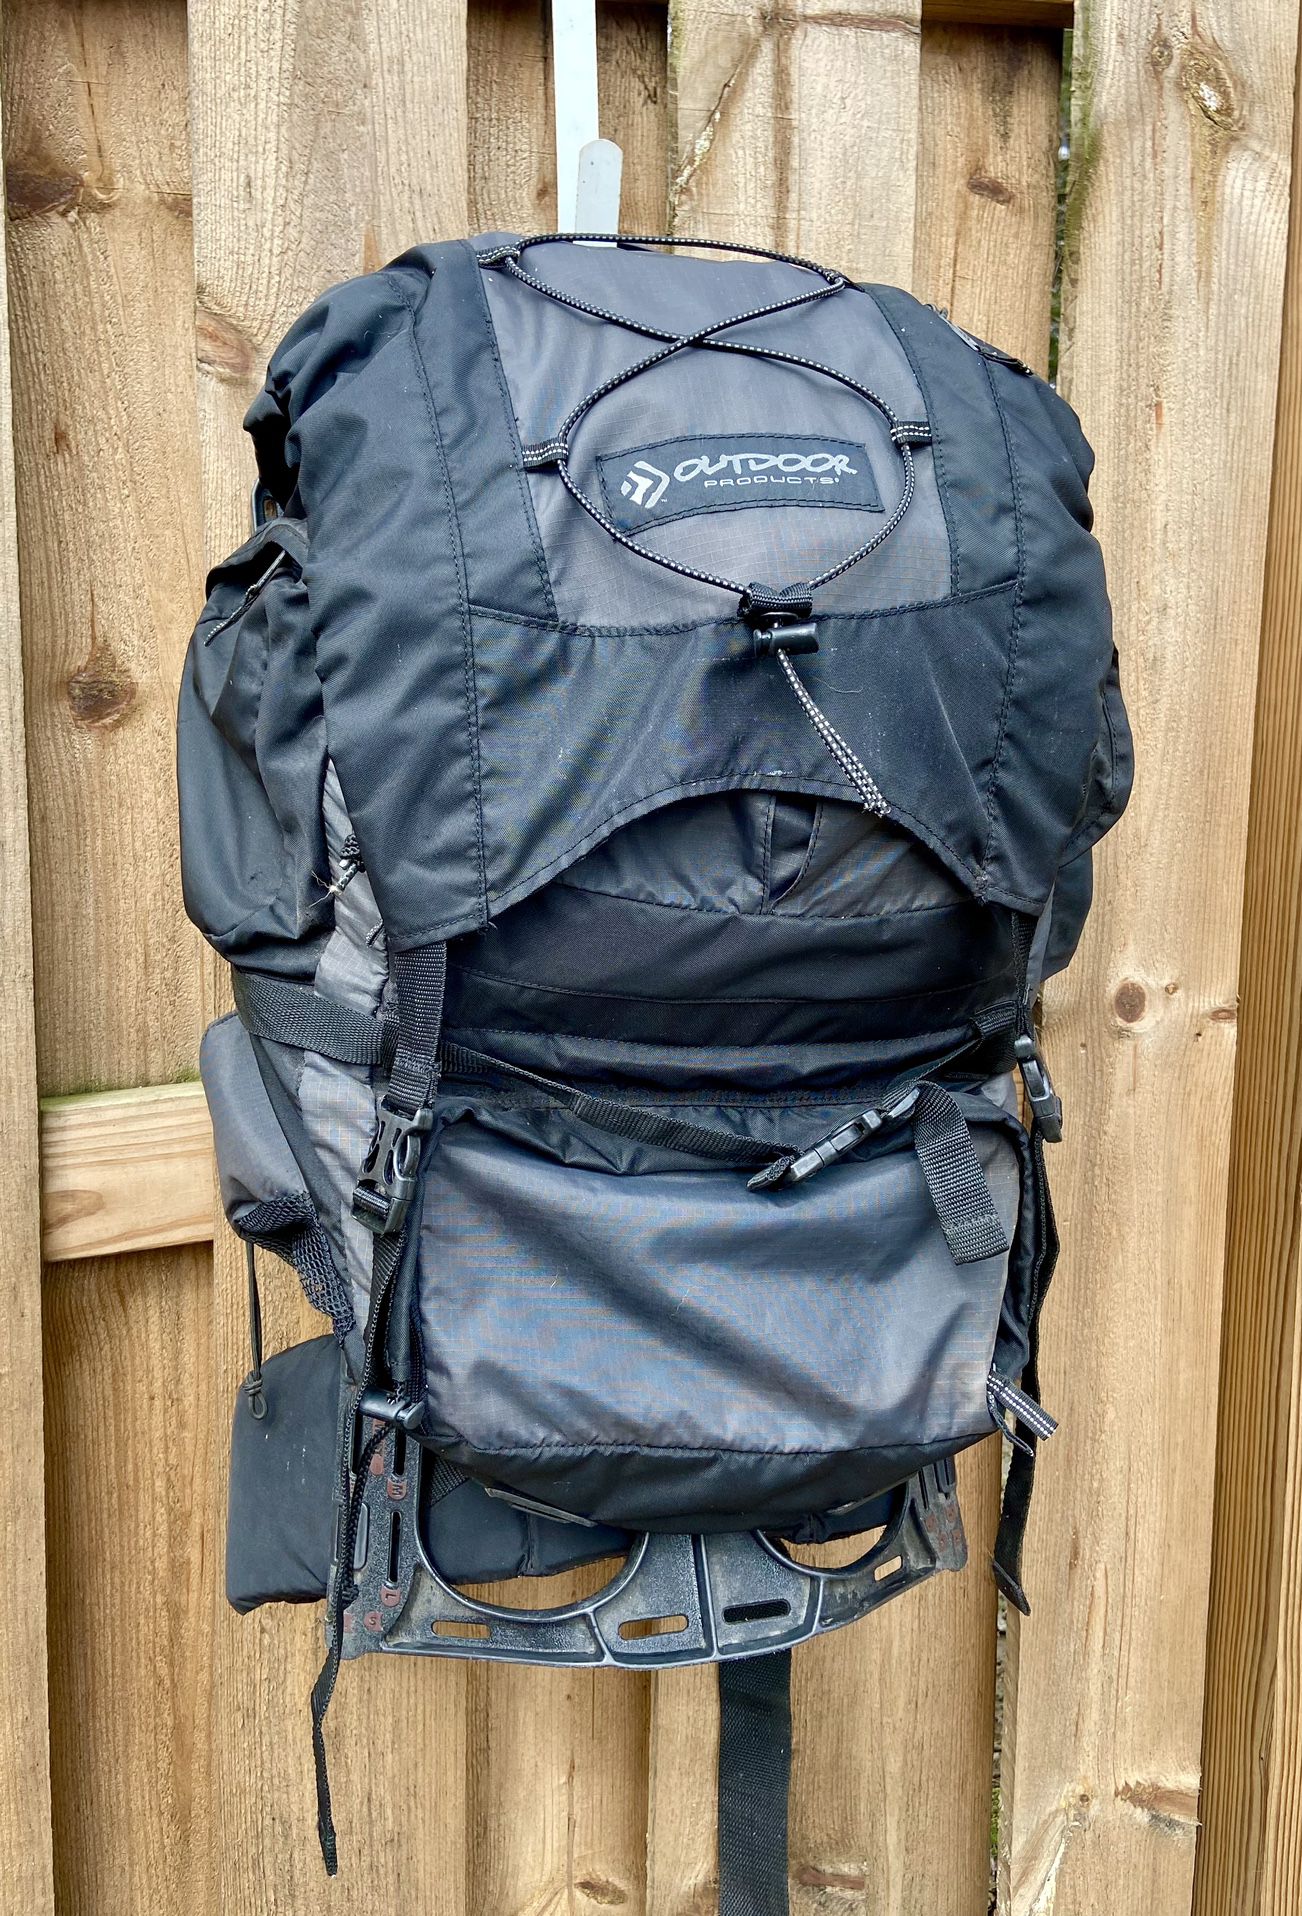 Outdoor Research Hiking Backpack